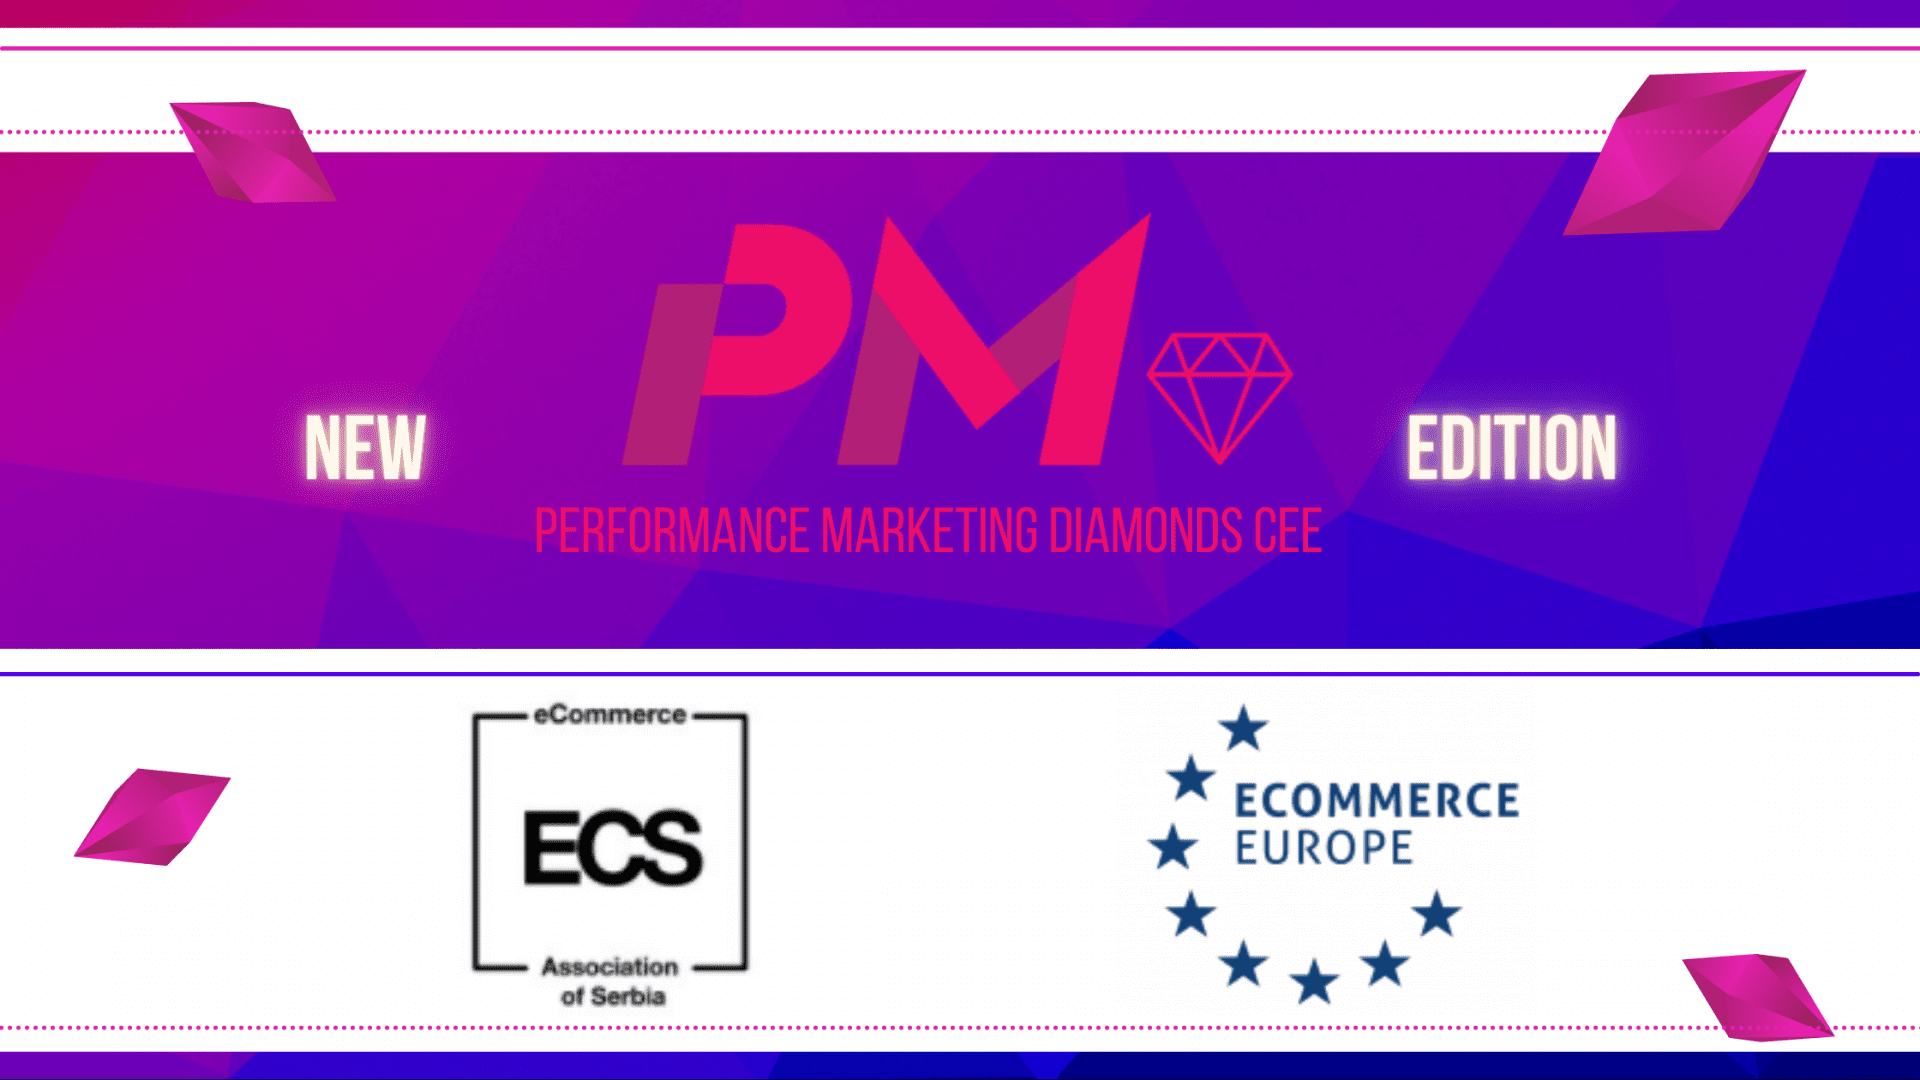 Thanks to the European organizations E-Commerce Association of Serbia and Ecommerce Europe for their support in promoting Performance Marketing Diamonds CEE 2022!